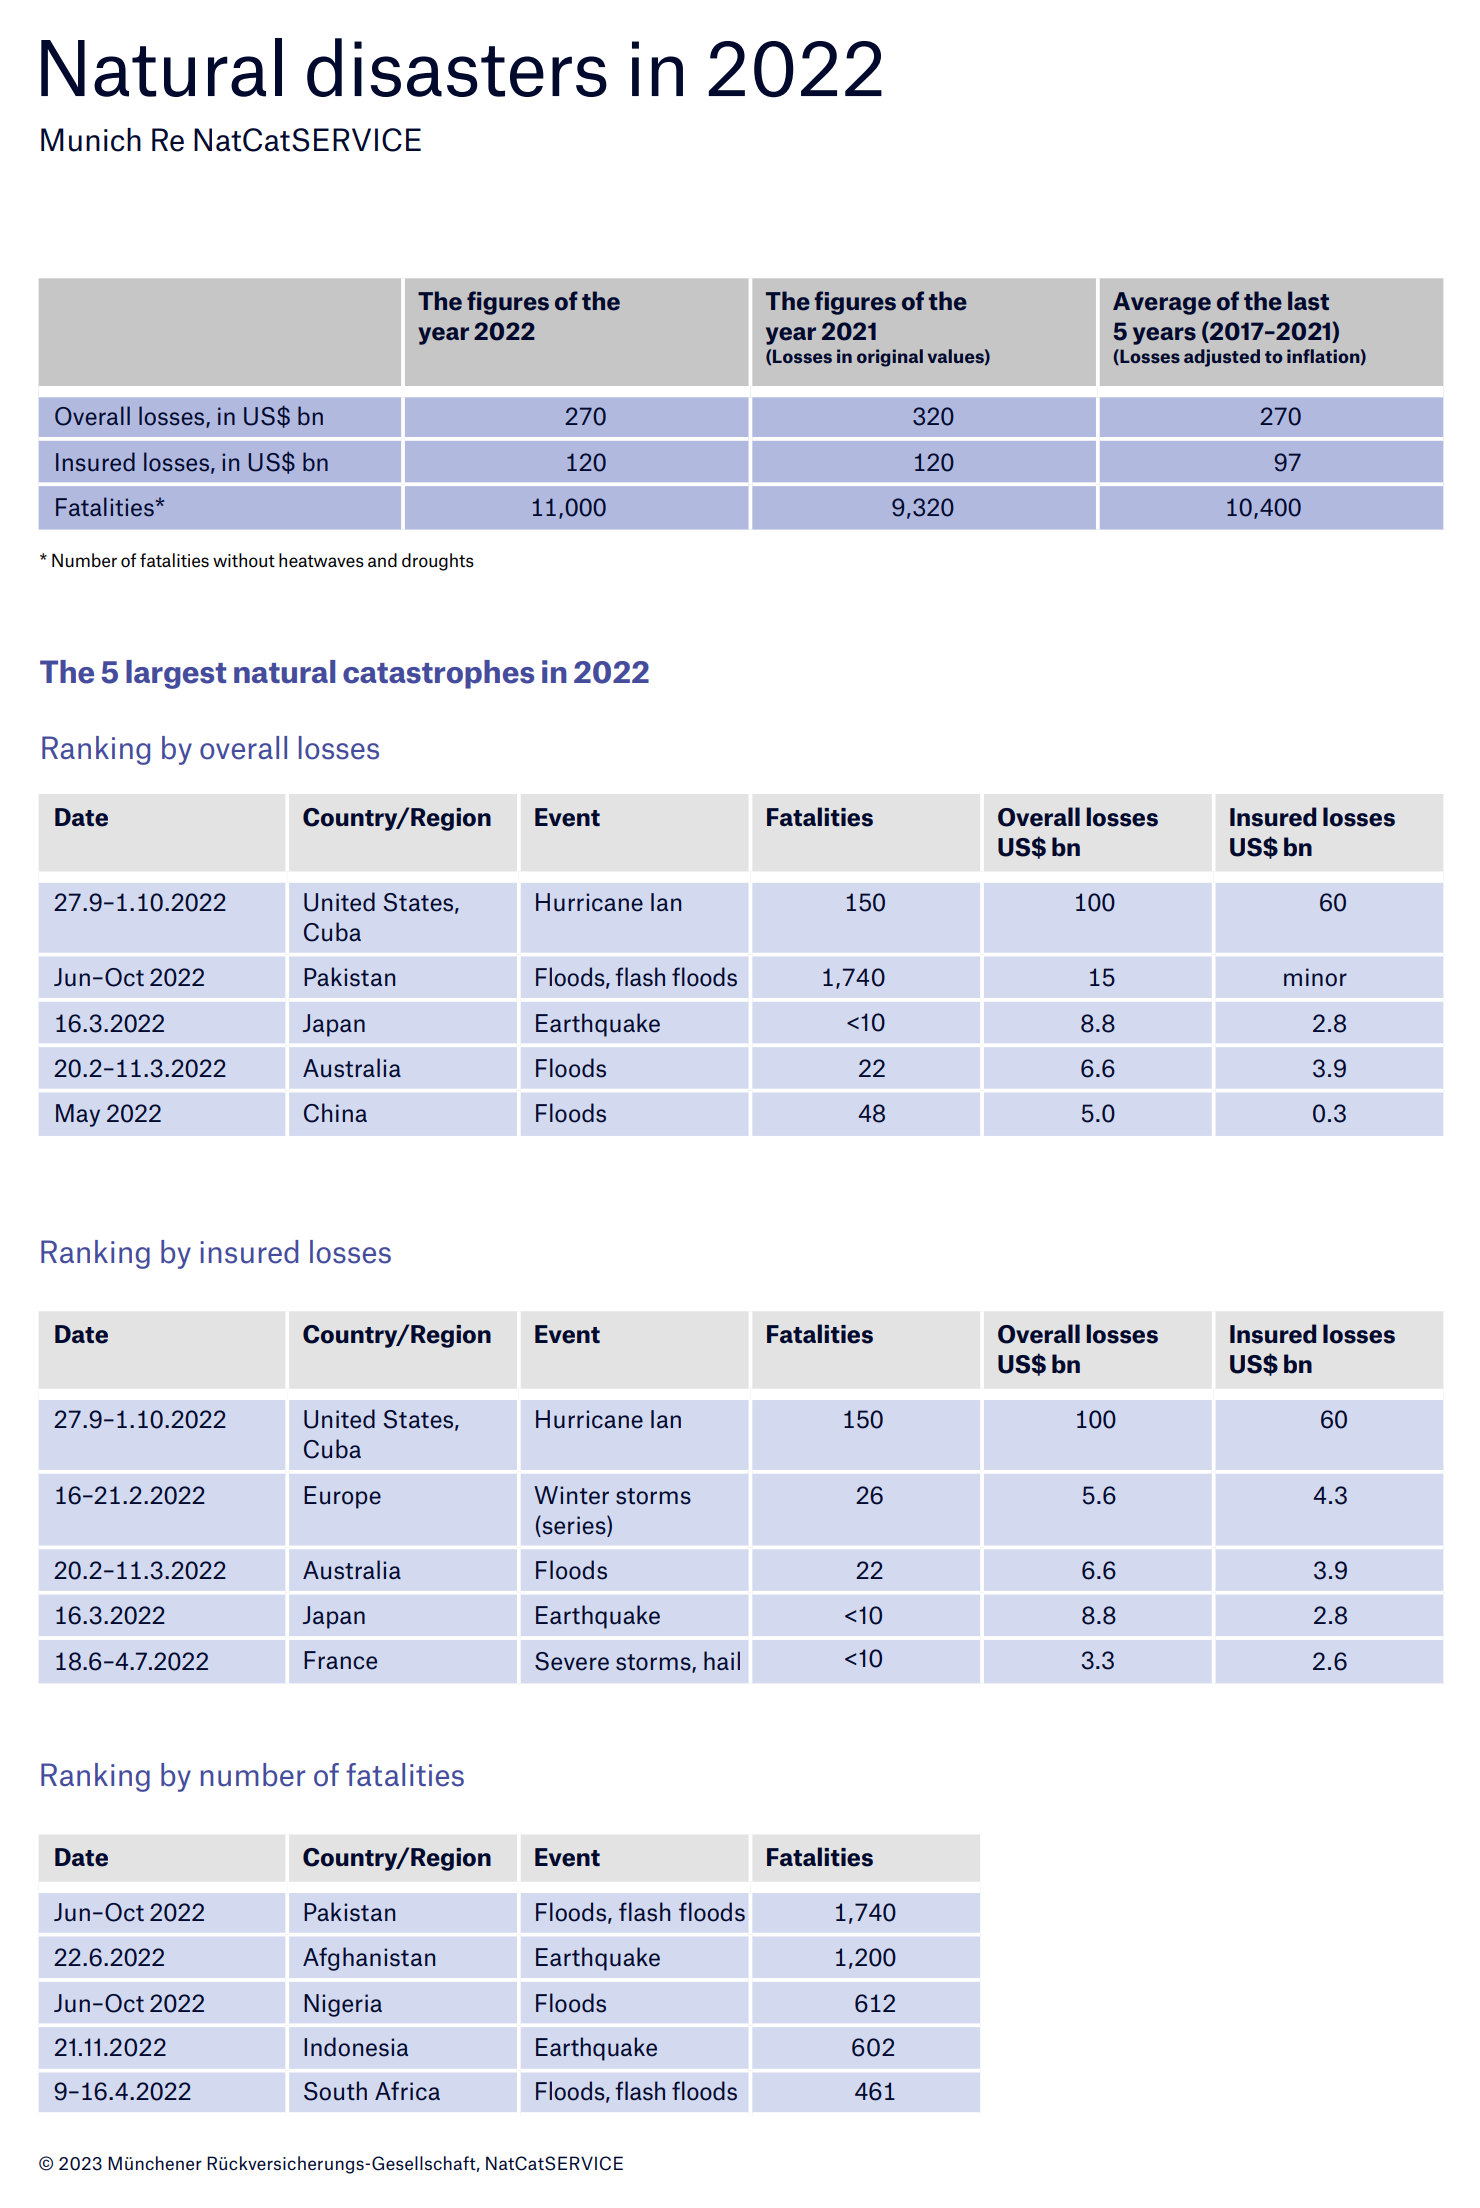 Tables of natural disasters in 2022 ranked by overall losses, insured losses, and number of fatalities. Data: Münchener Rückversicherungs-Gesellschaft, NatCatSERVICE. Graphic: Munich Re